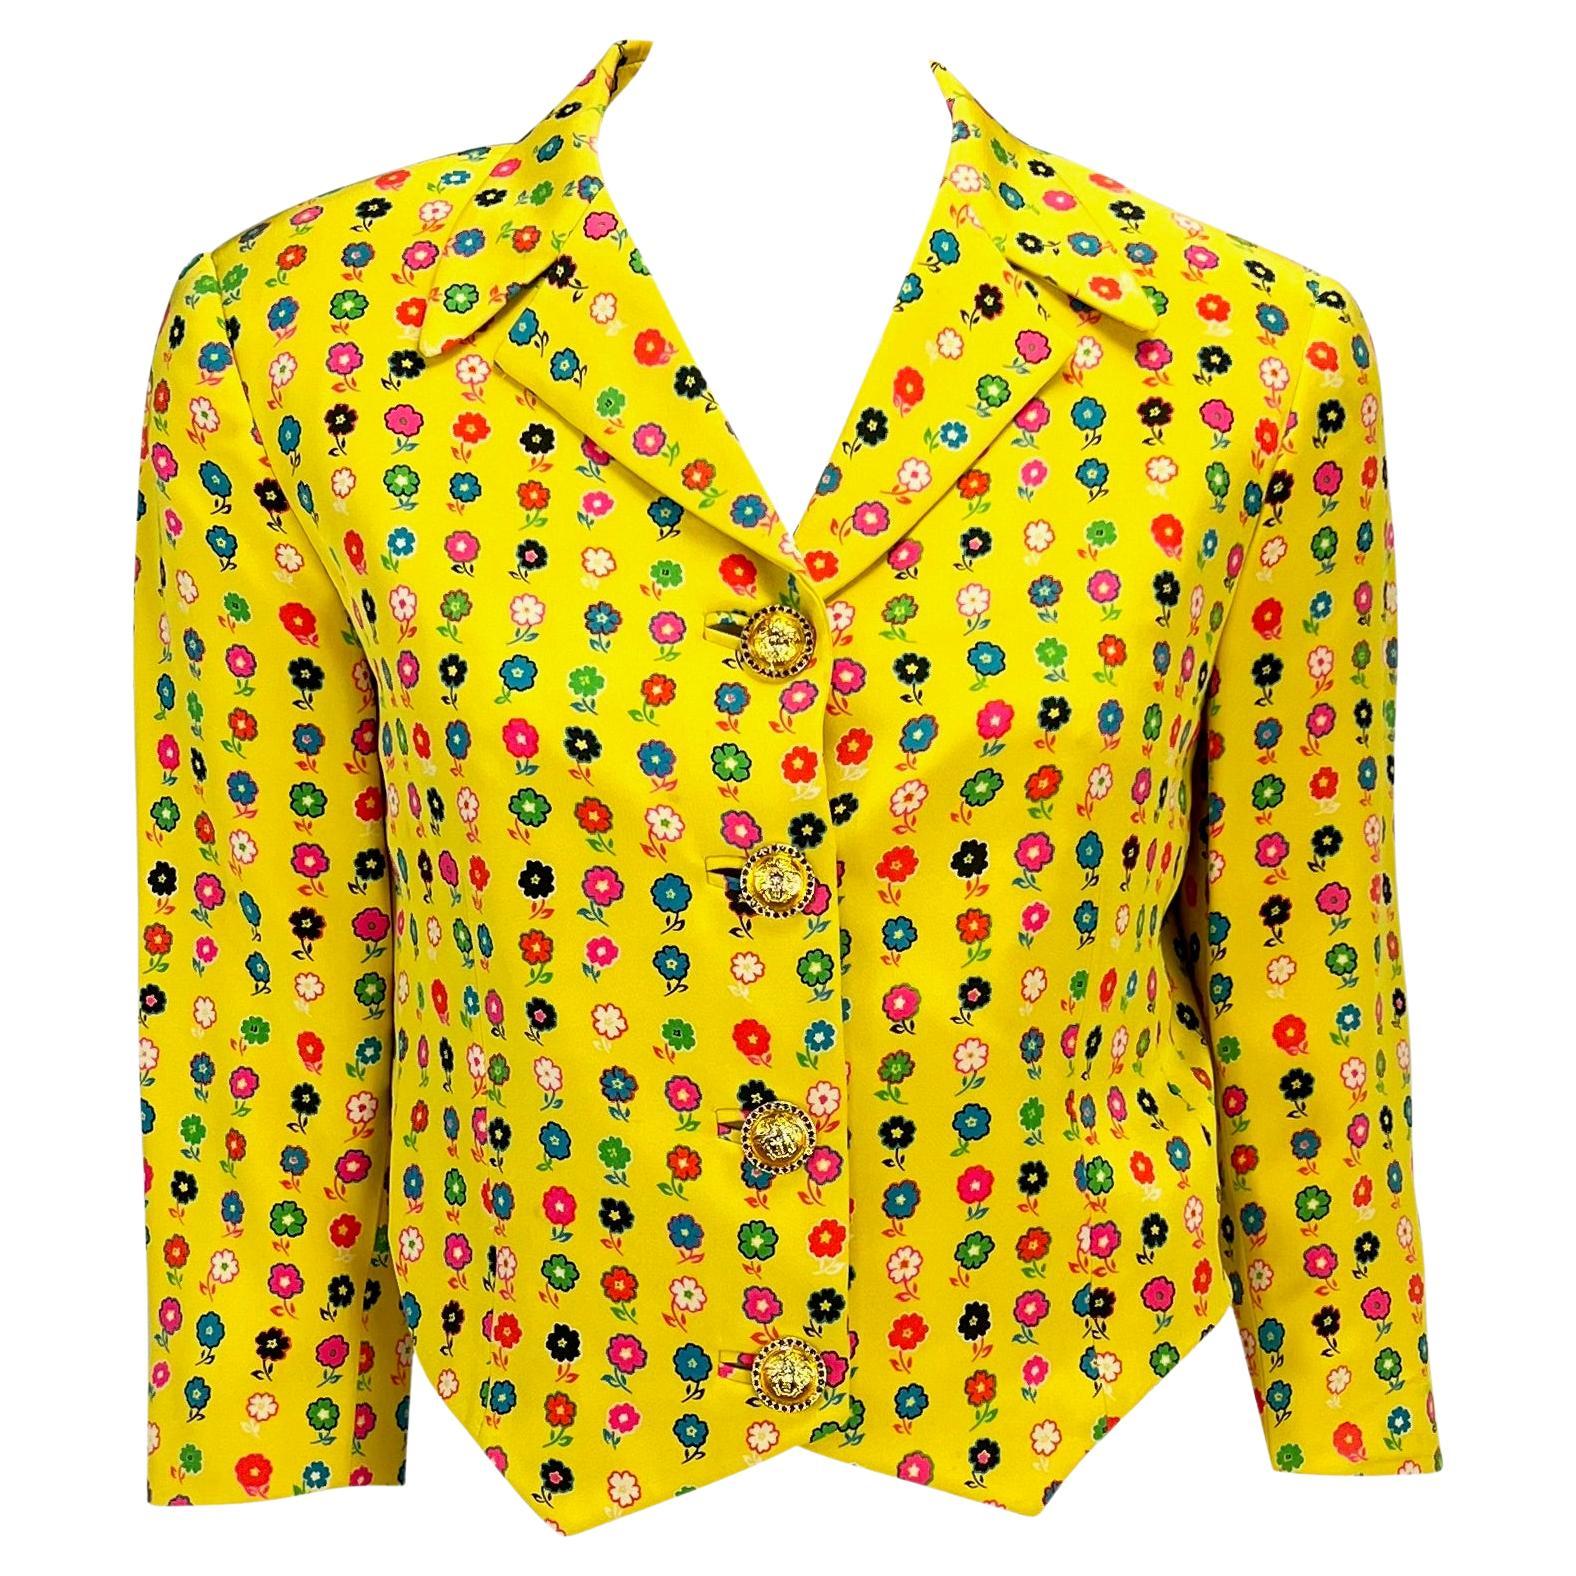 S/S 1993 Gianni Versace Couture Runway Yellow Floral Medusa Blazer Jacket For Sale